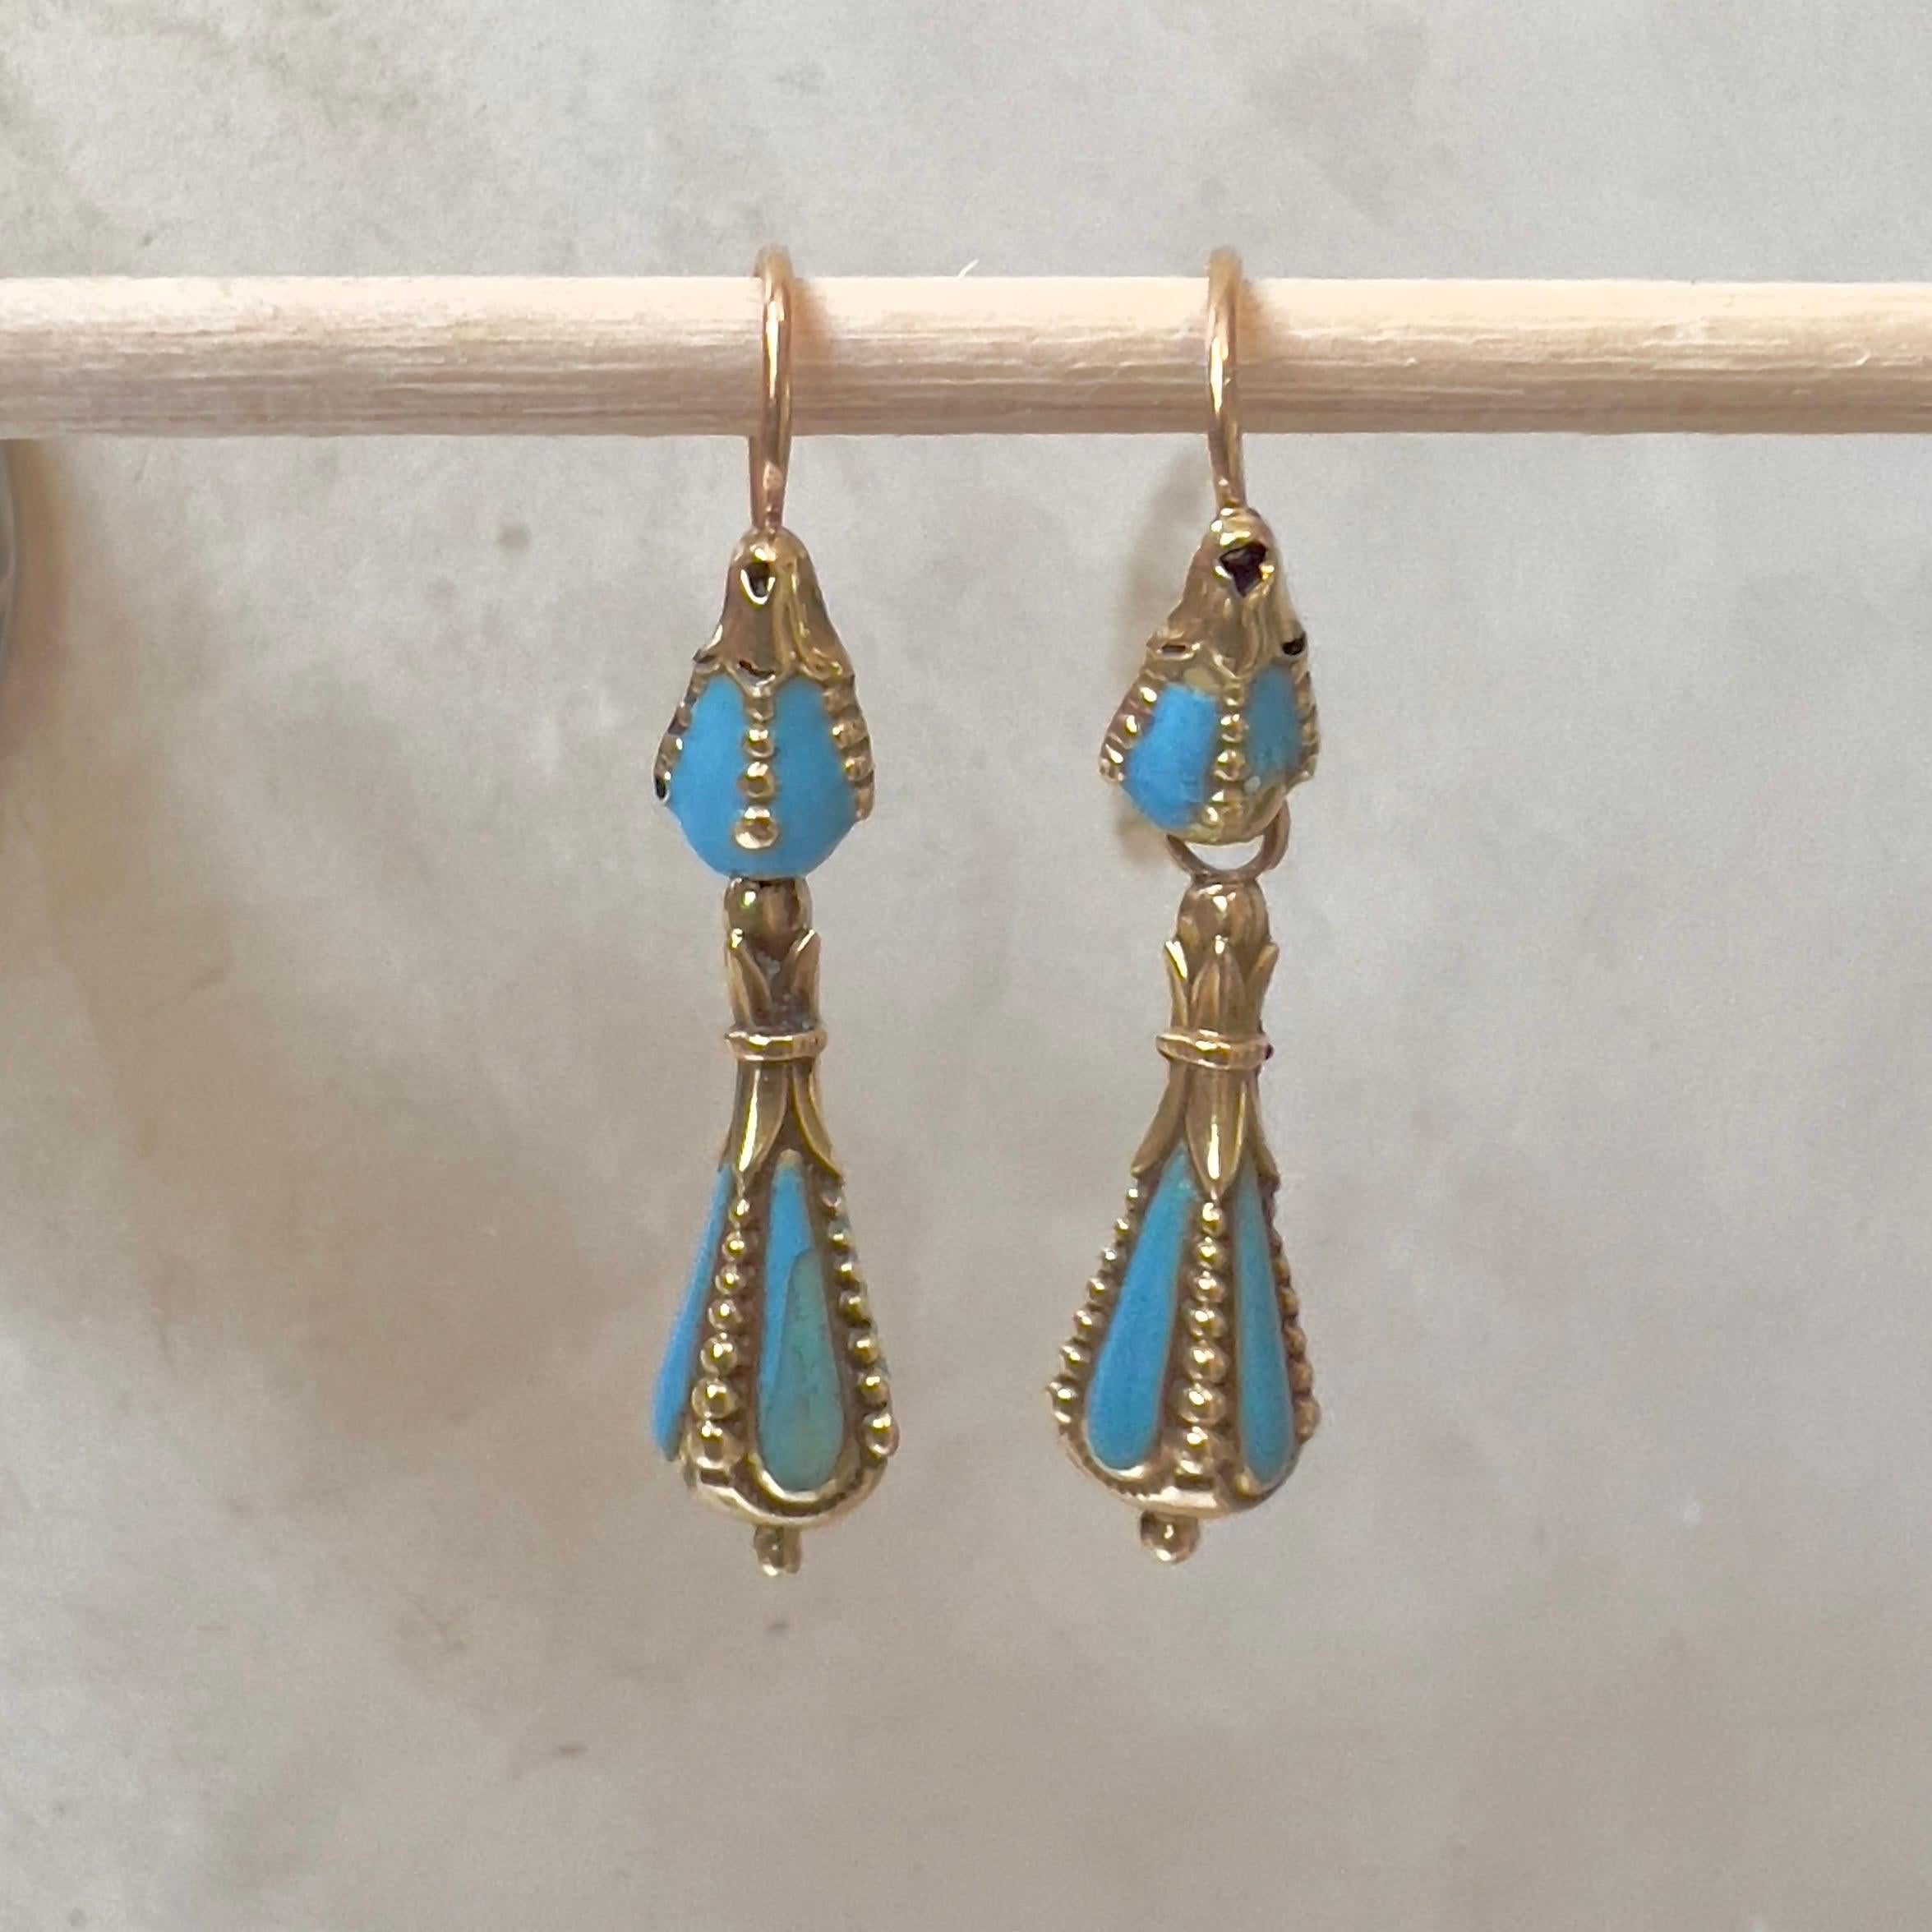 An antique pair of 14 karat gold drop earrings set with turquoise turquoise enamel and gold granulation.

Transport yourself to a bygone era with these exquisite antique 19th century turquoise enamel 14 Karat gold drop earrings. Crafted with